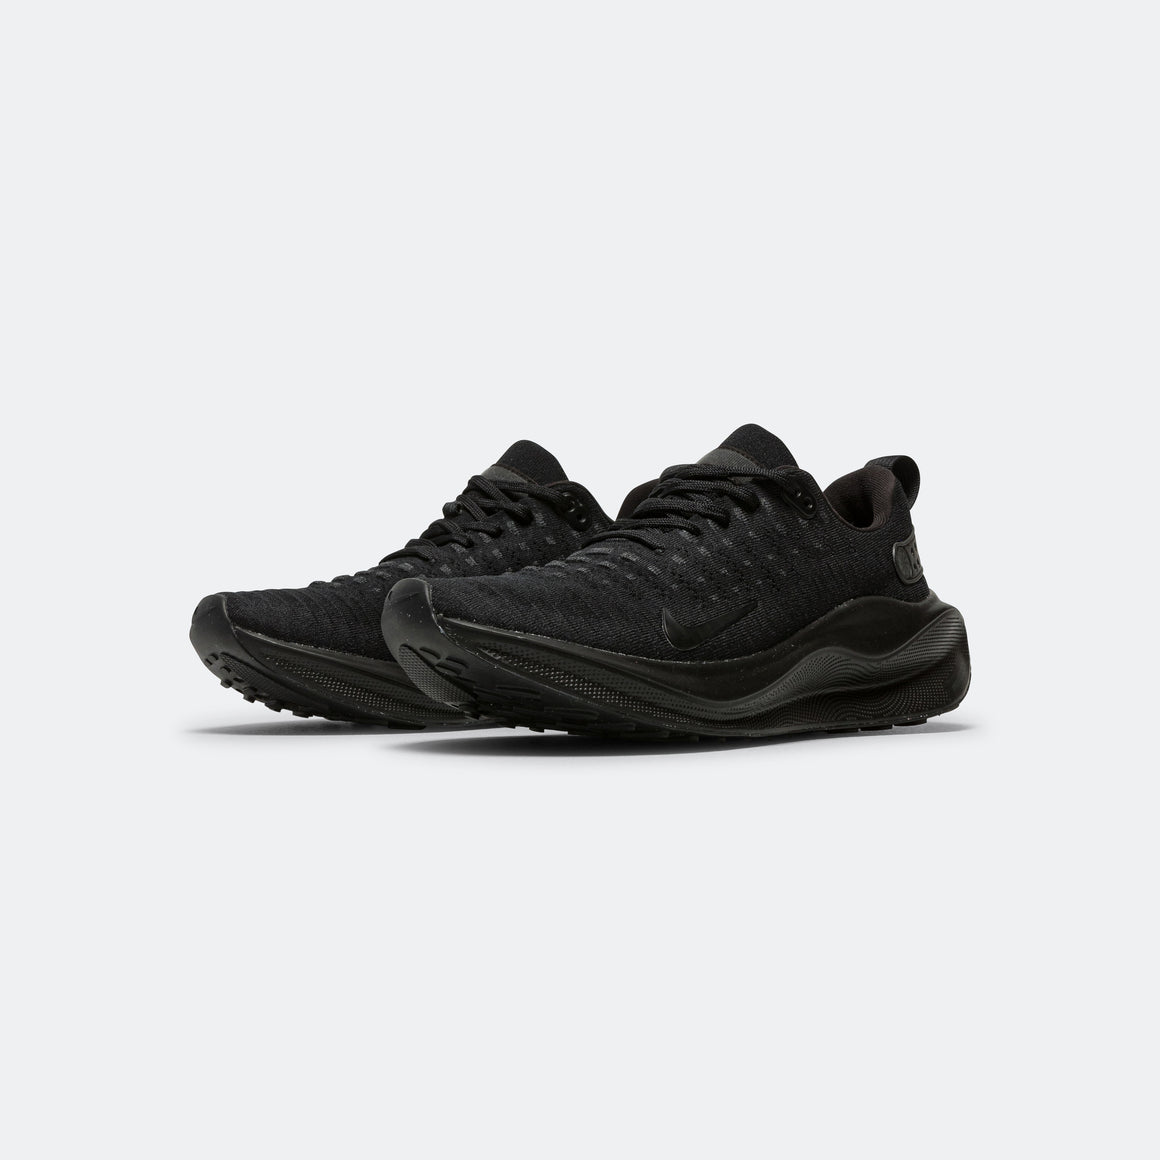 Nike - Mens ReactX Infinity Run 4 - Black/Black-Anthracite - Up There Athletics